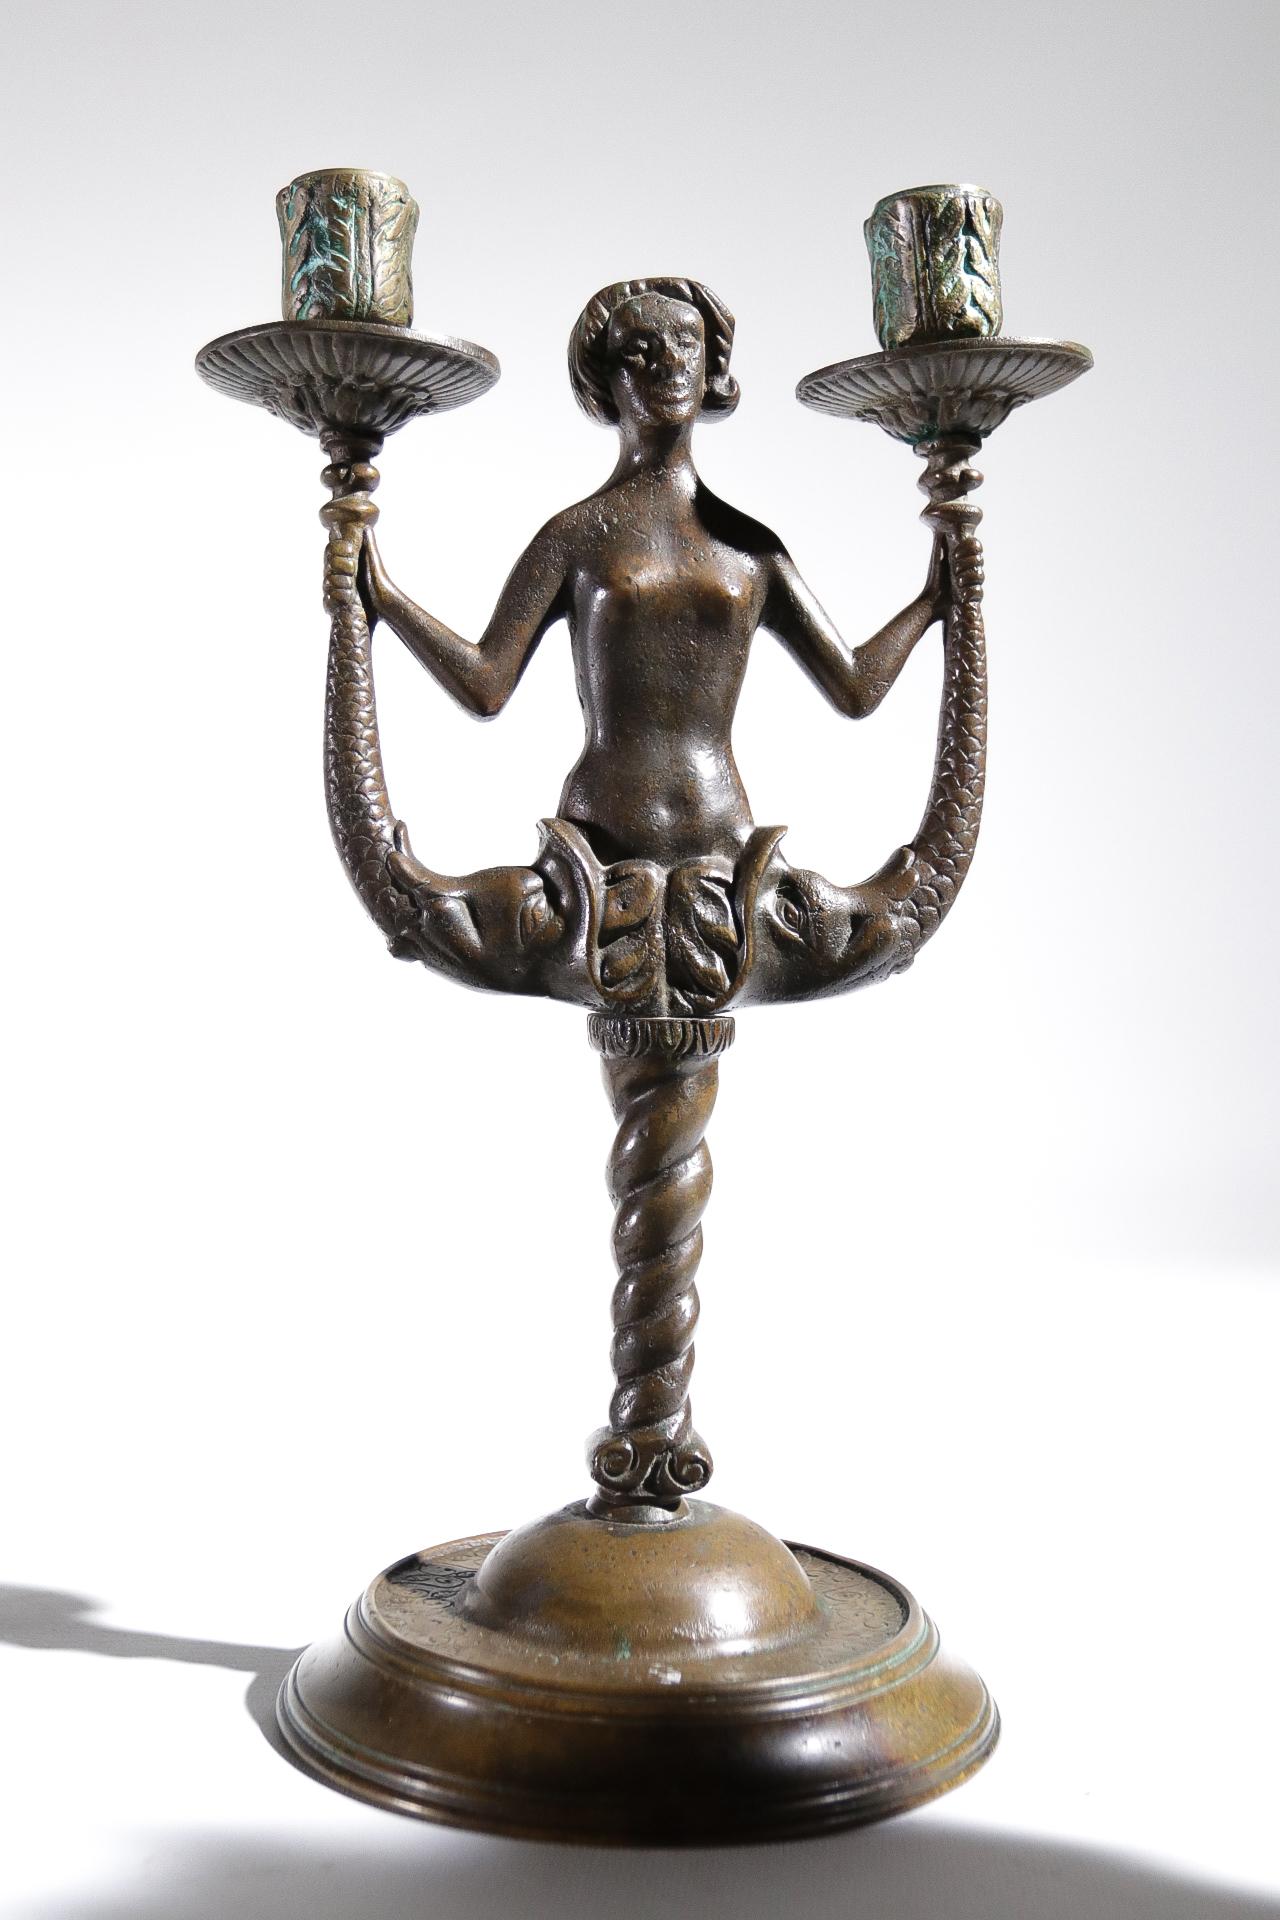 Pair of candleholder made in France in the 19th century.
Model inspired from the 15th century Renaissance
Made of bronze in good condition but one dish is missing.
Very decorative.
Measures: H 32.5 cm, W 19 cm, ø 15cm.